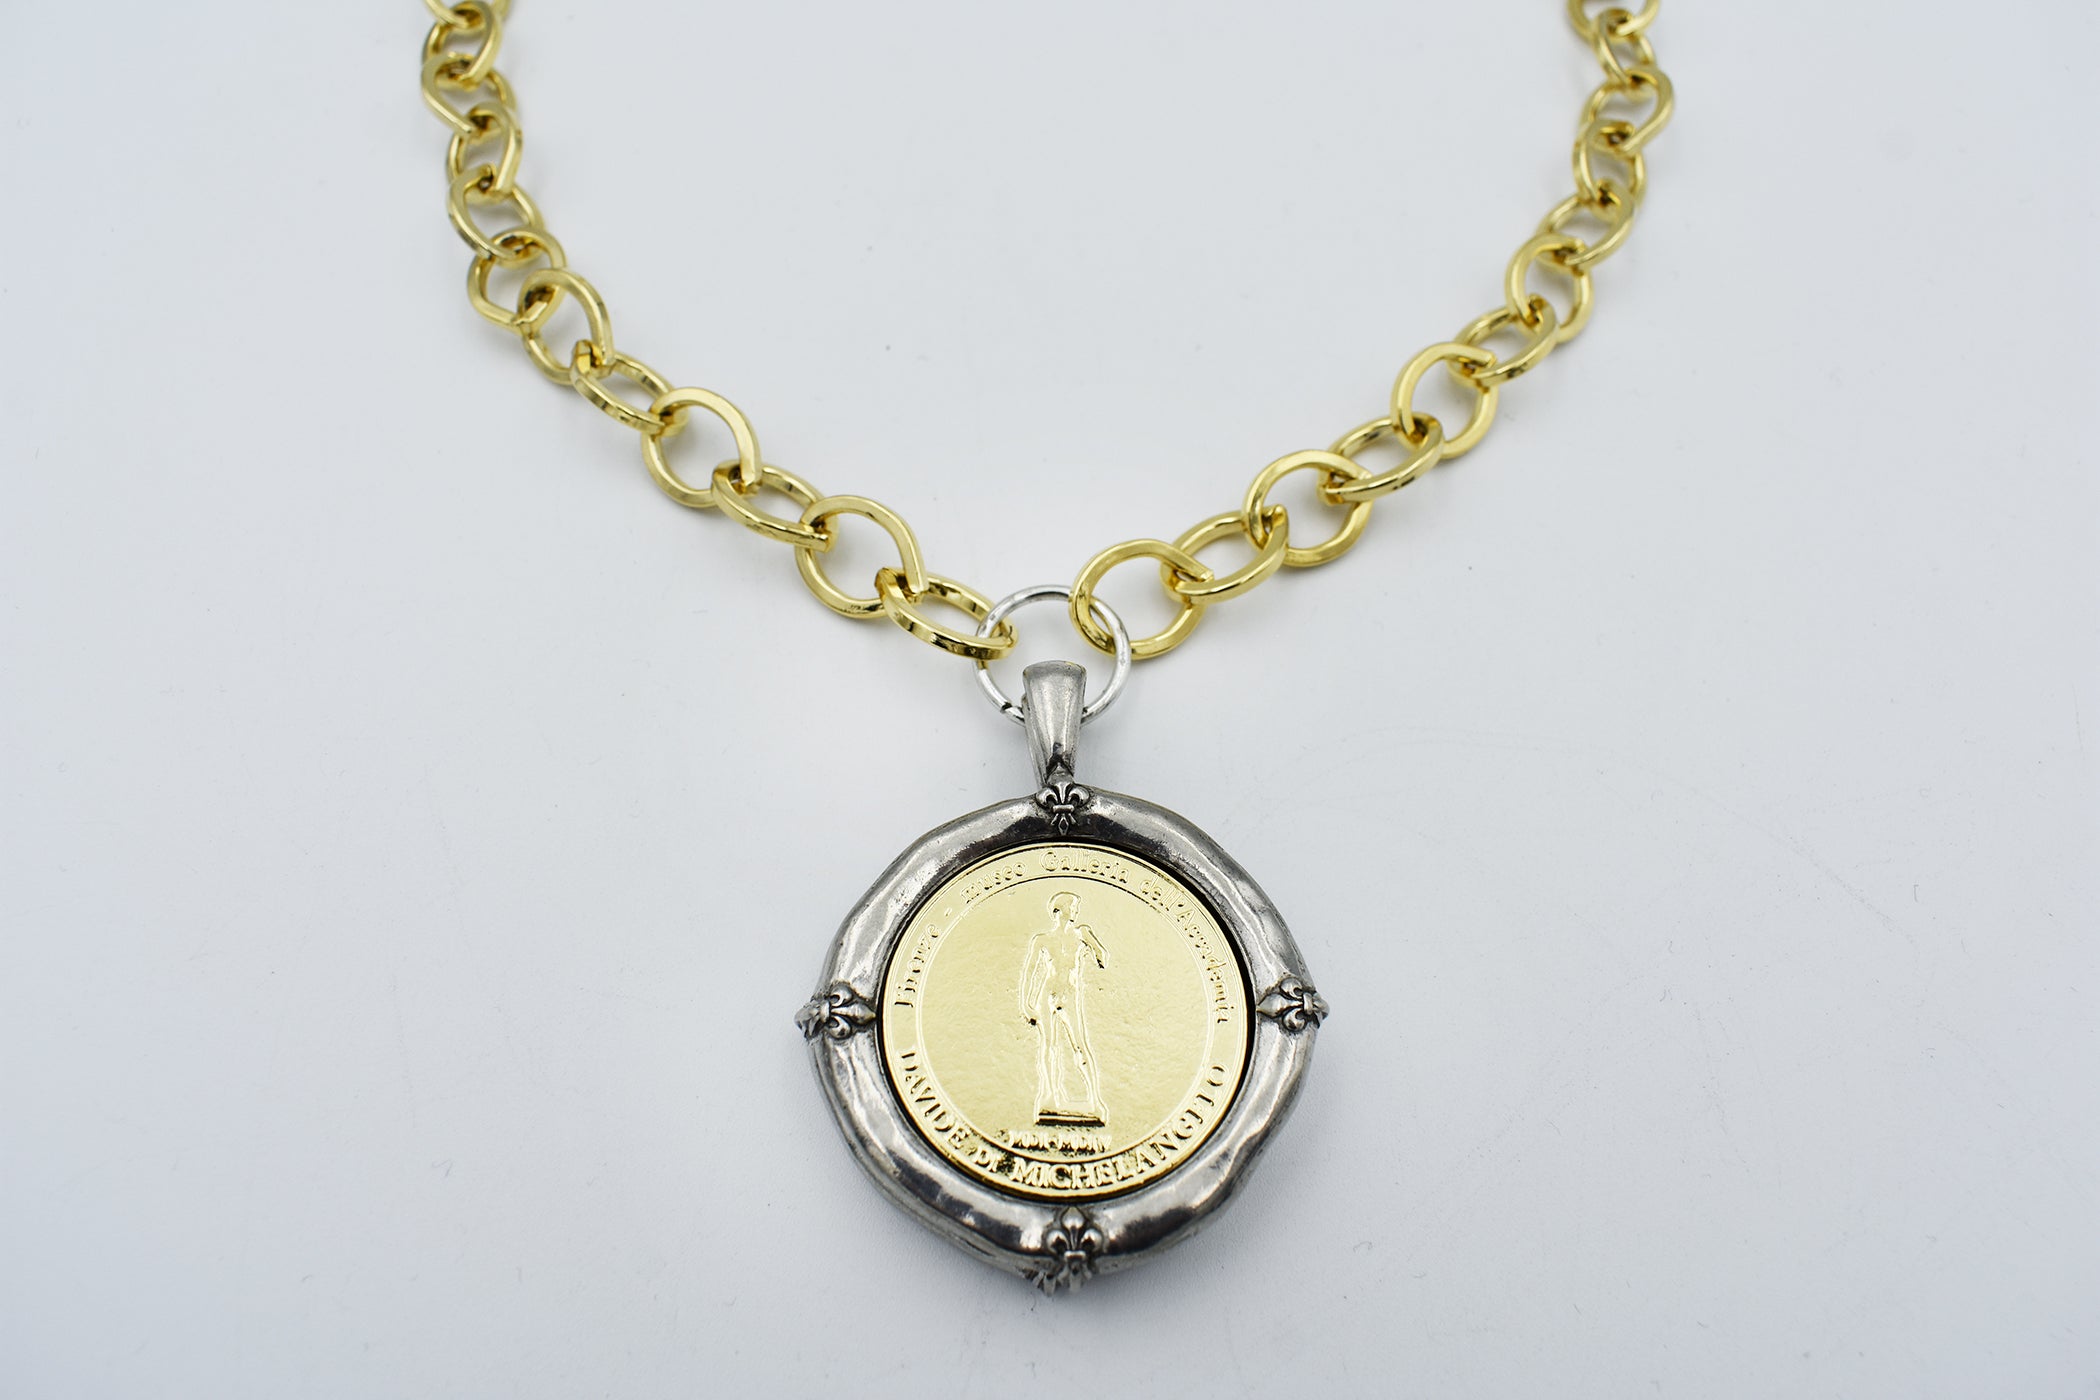 Italian Treasures Collection Gold Chain Necklace with David Coin